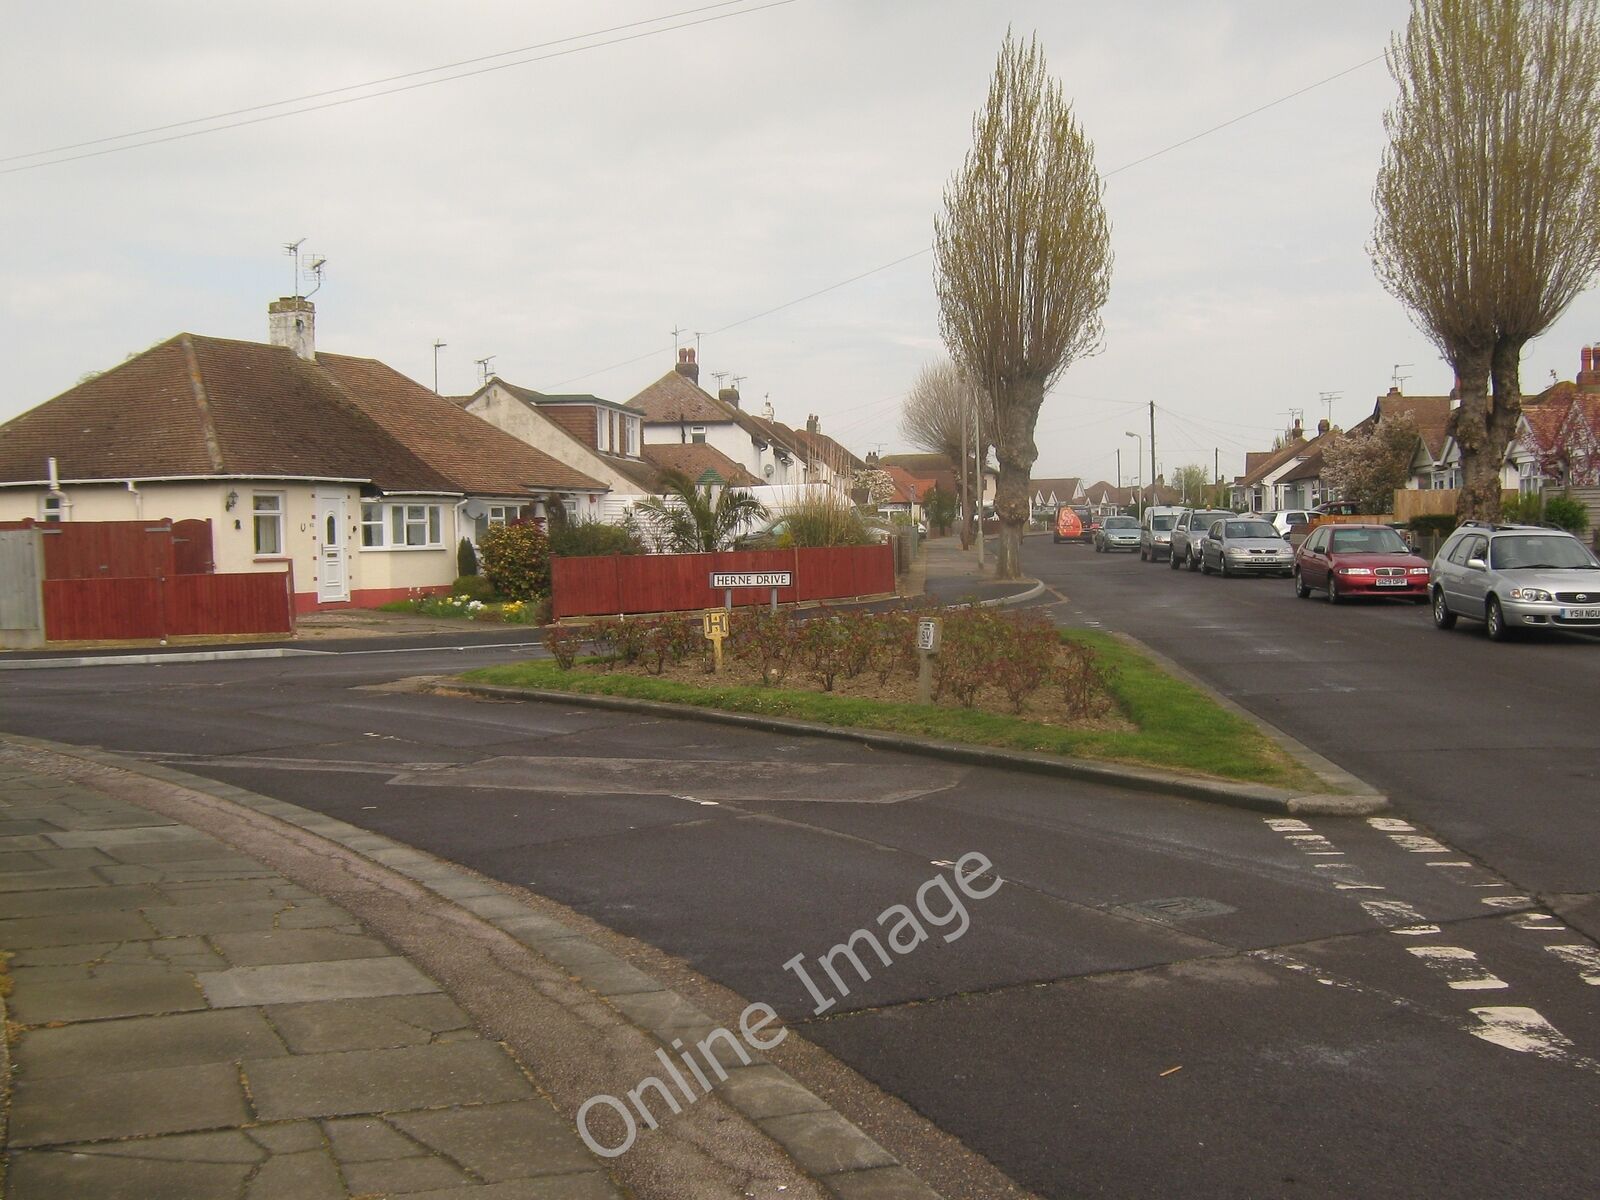 Photo 12x8 Herne Drive and The Grove road junction Herne Bay\/TR1767 The G c2010